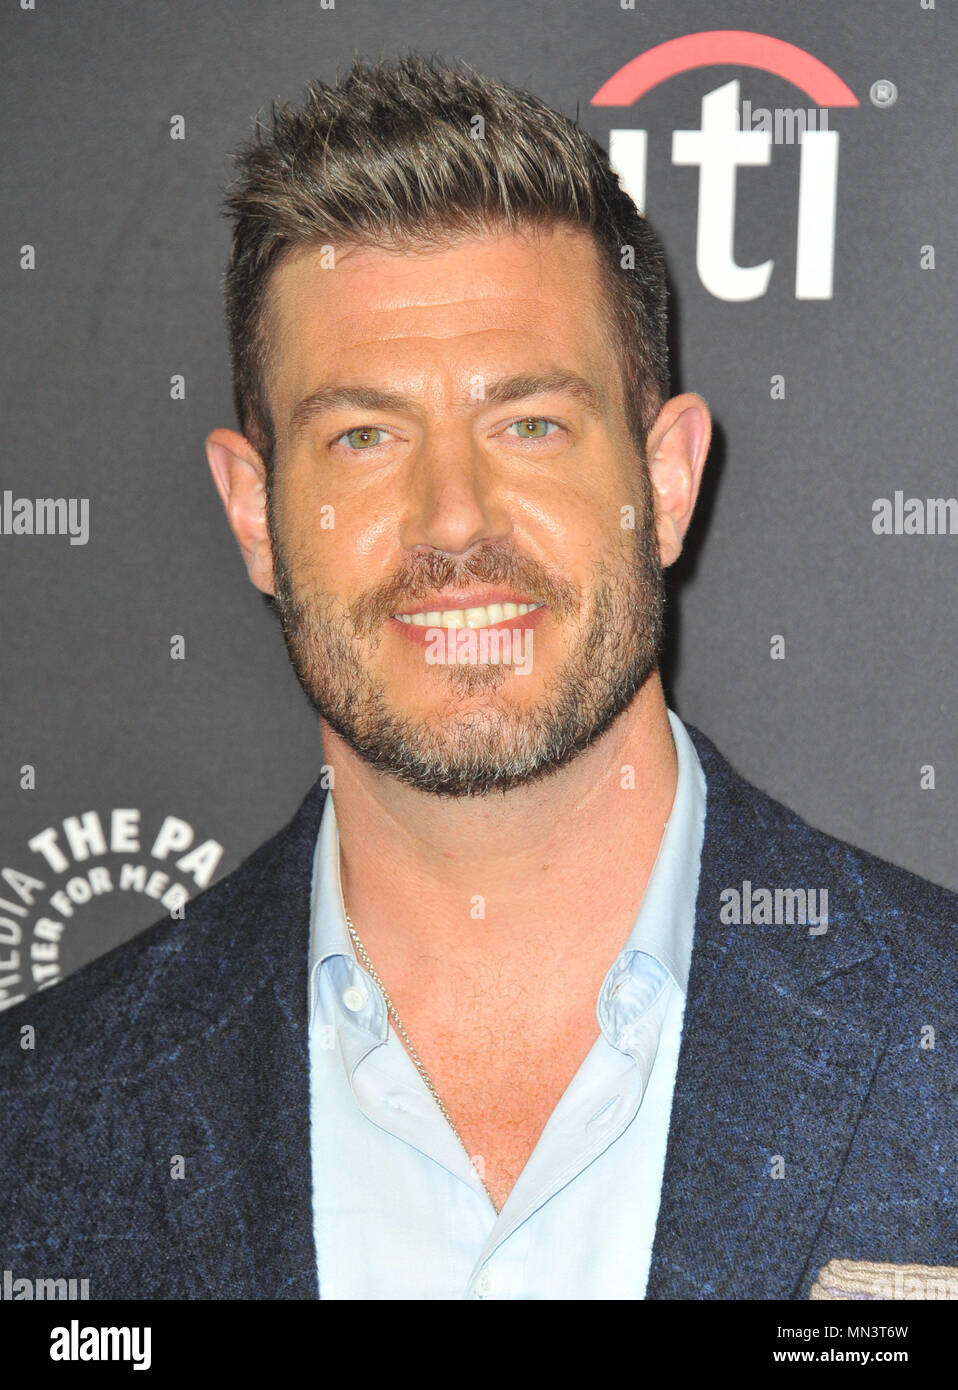 HOLLYWOOD, CA - MARCH 26: Jesse Palmer attends the 'Scandal' event at the Paley Center for Media's 34th annual PaleyFest at Dolby Theatre on March 26, 2017 in Hollywood, California   People:  Jesse Palmer Stock Photo